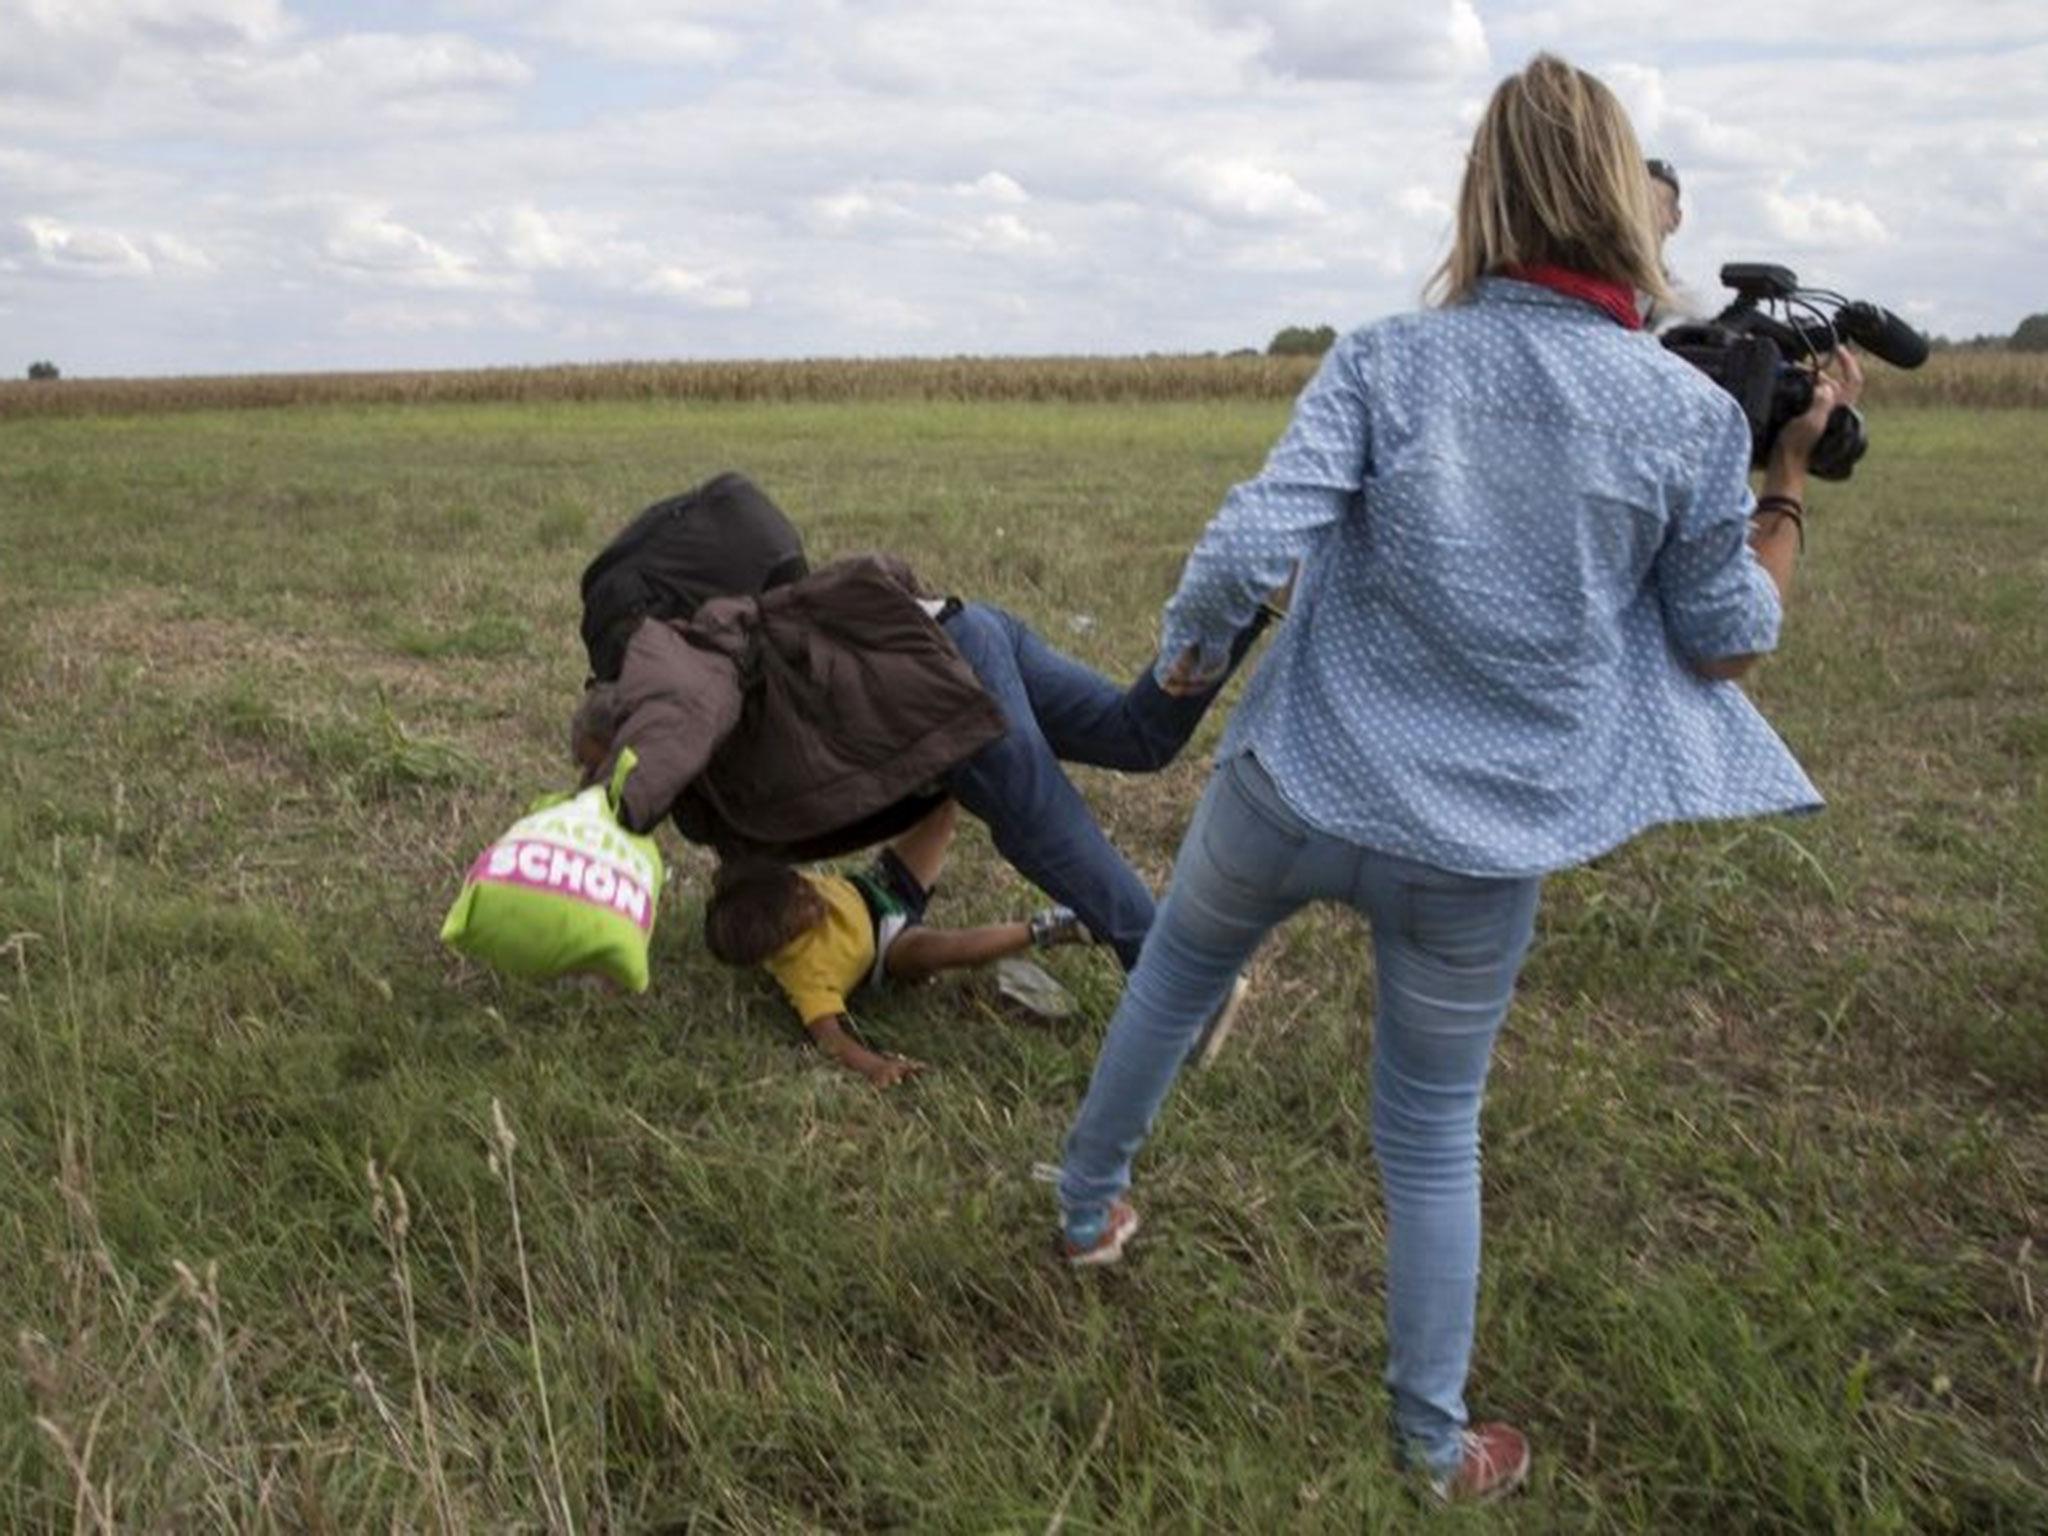 Petra László was caught on camera kicking and tripping up refugees